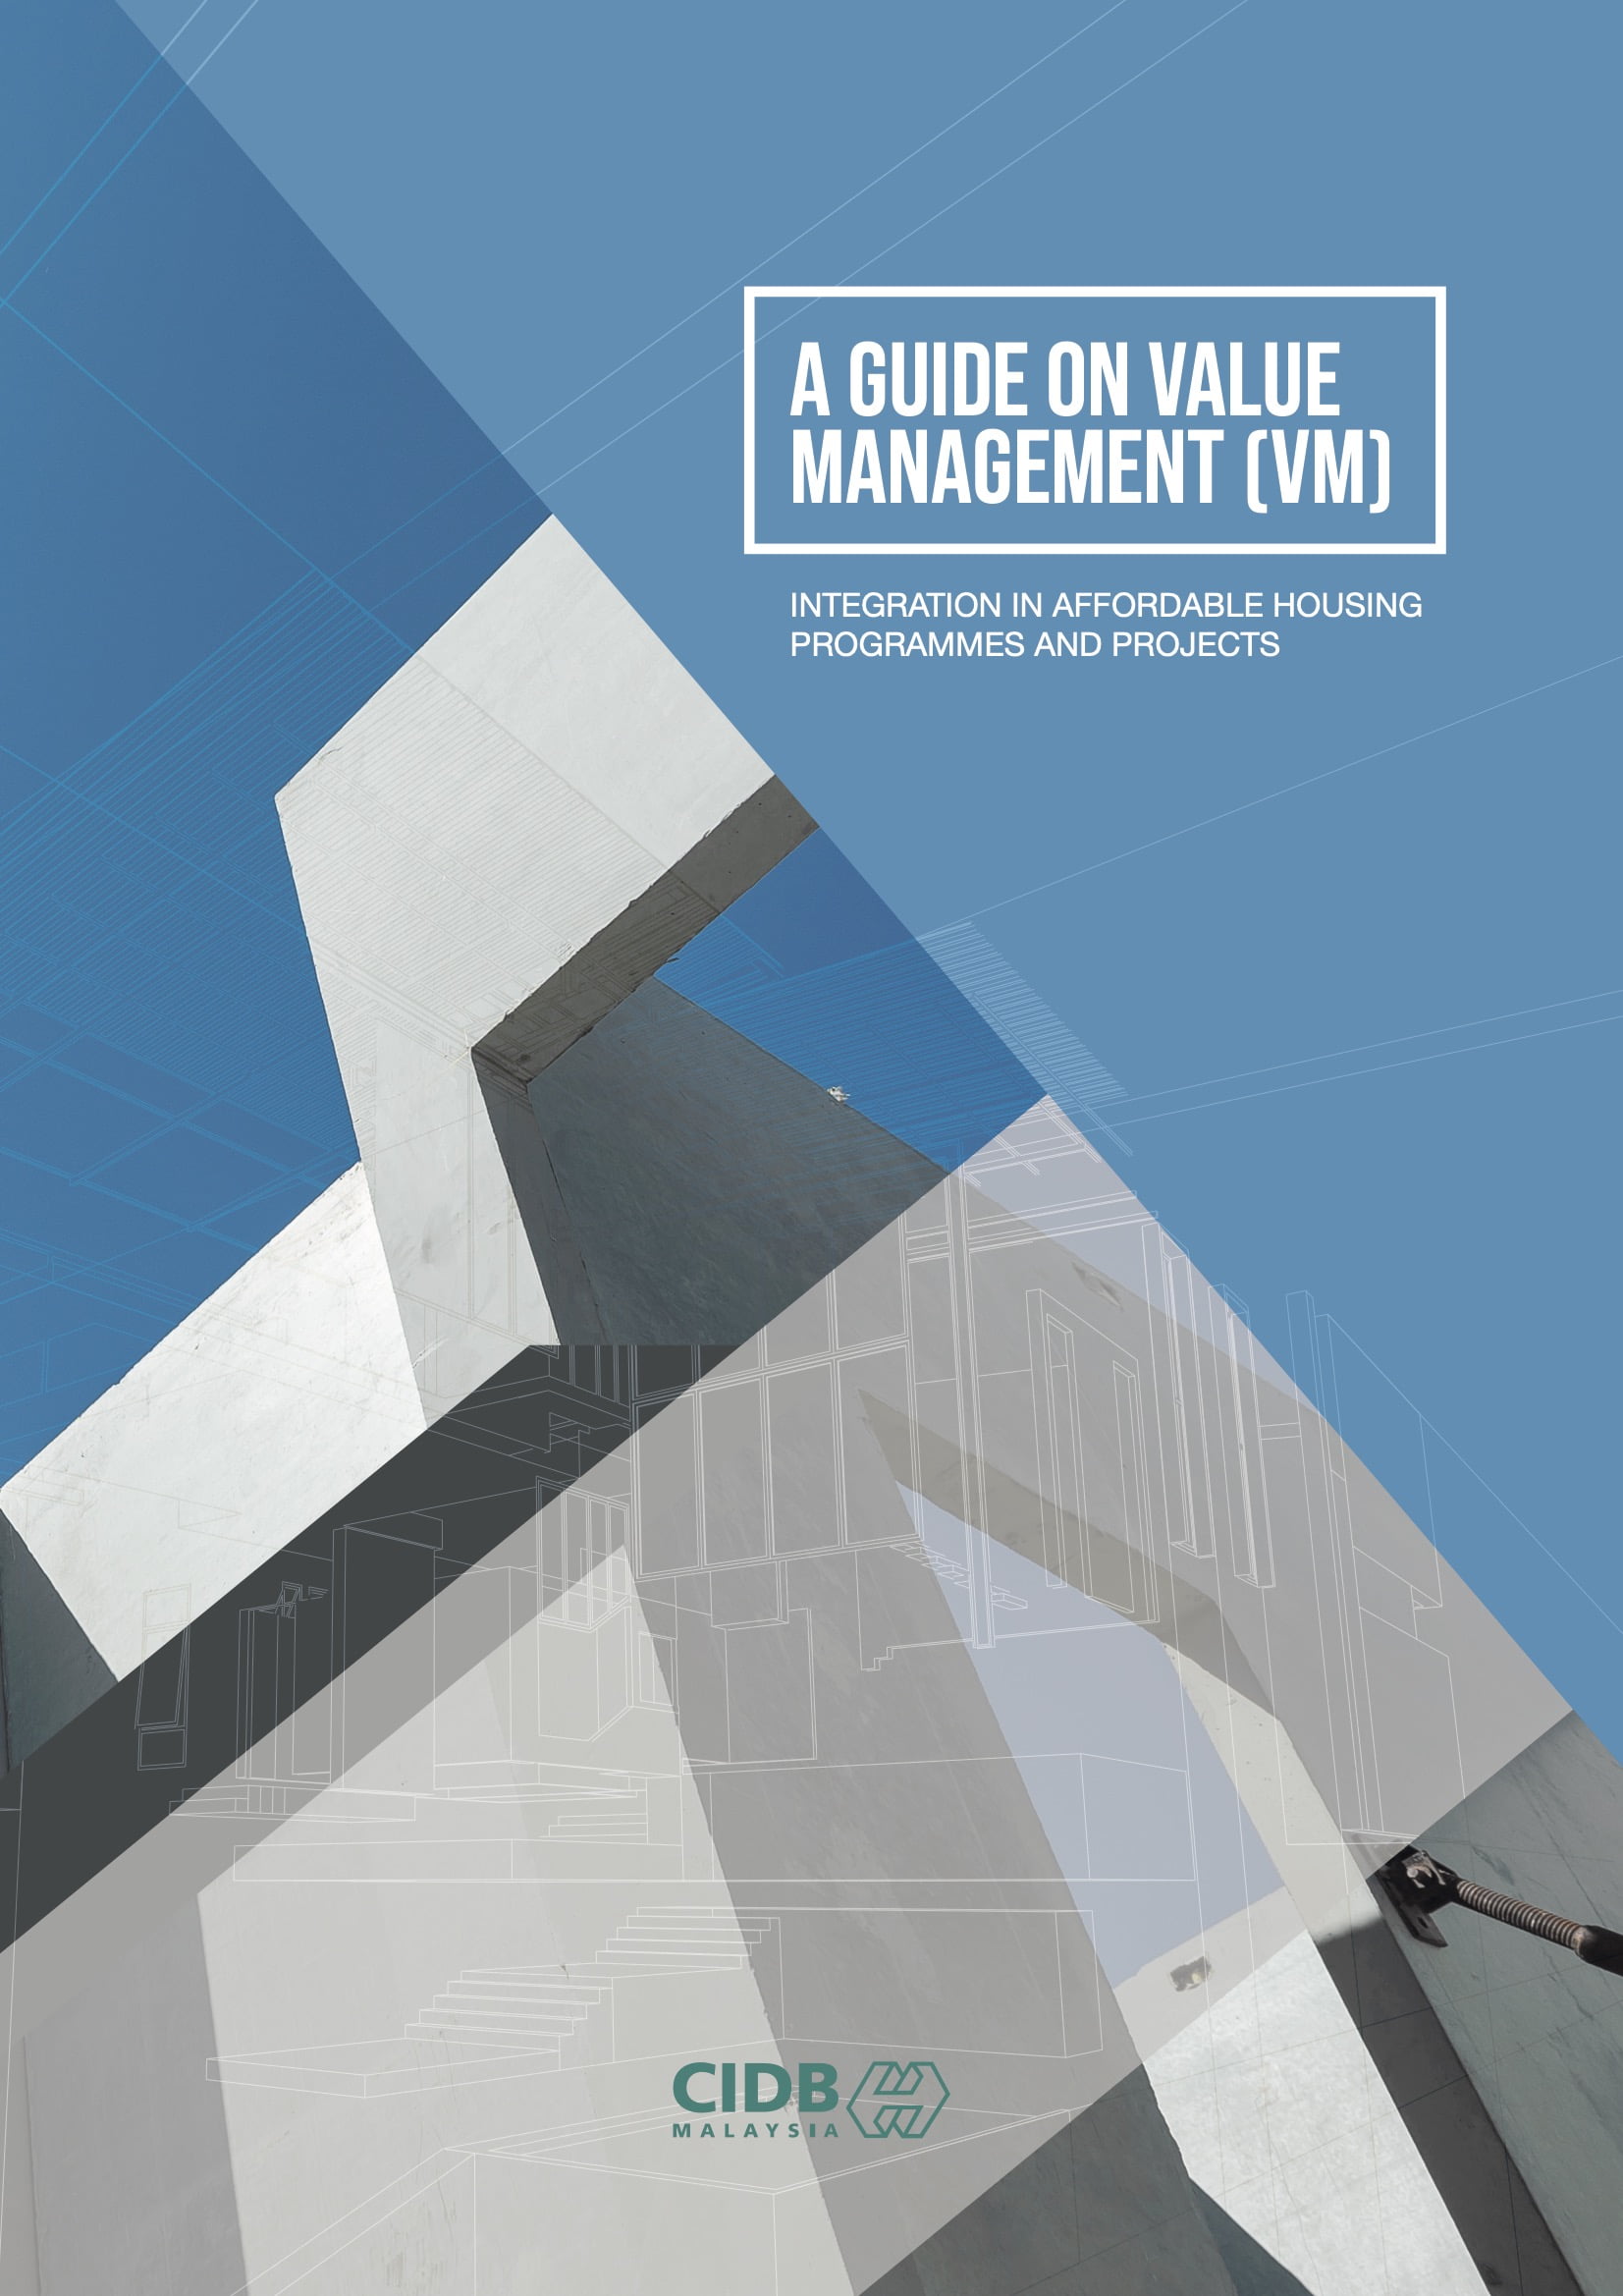 CIDB-CREAM-A-Guide-On-Value-Management-VM-cover